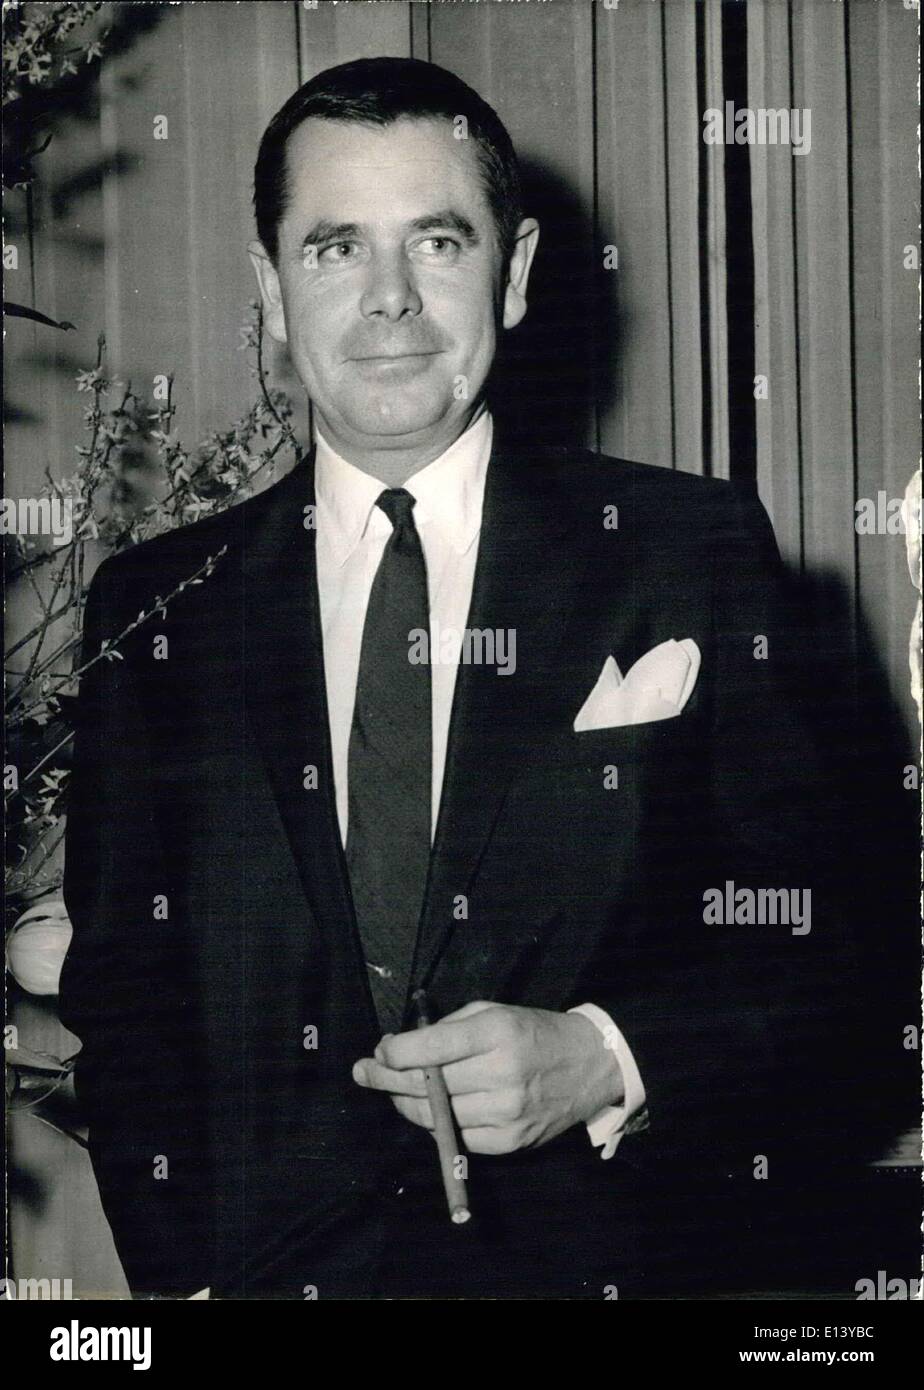 Mar. 31, 2012 - Glenn Ford in Paris. A Cocktail Party was given yesterday in a great Hotel in Paris for the American Star Glenn Stock Photo